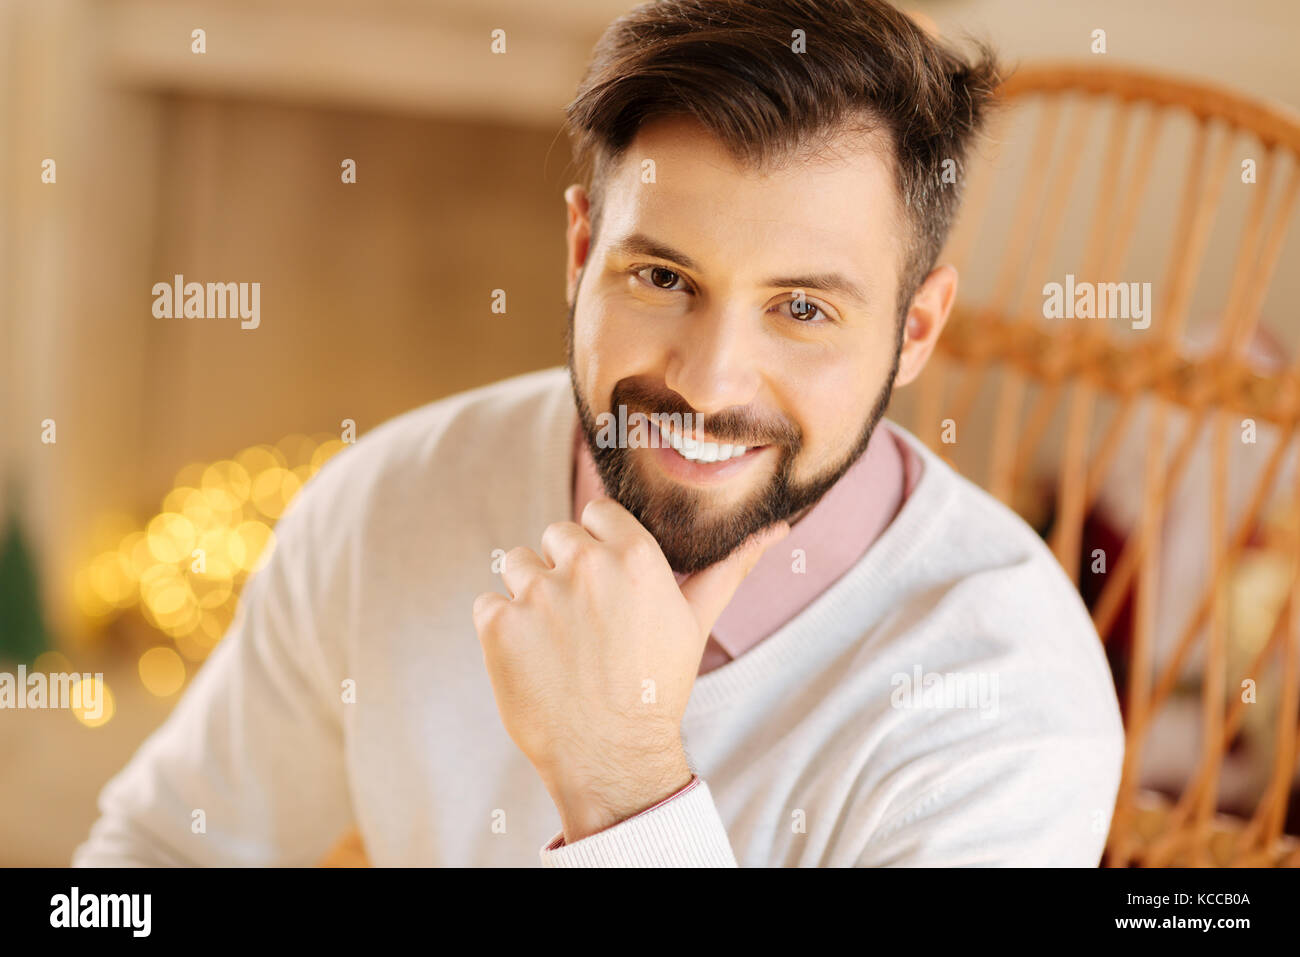 Portrait of dark-haired resting his chin on hand Stock Photo